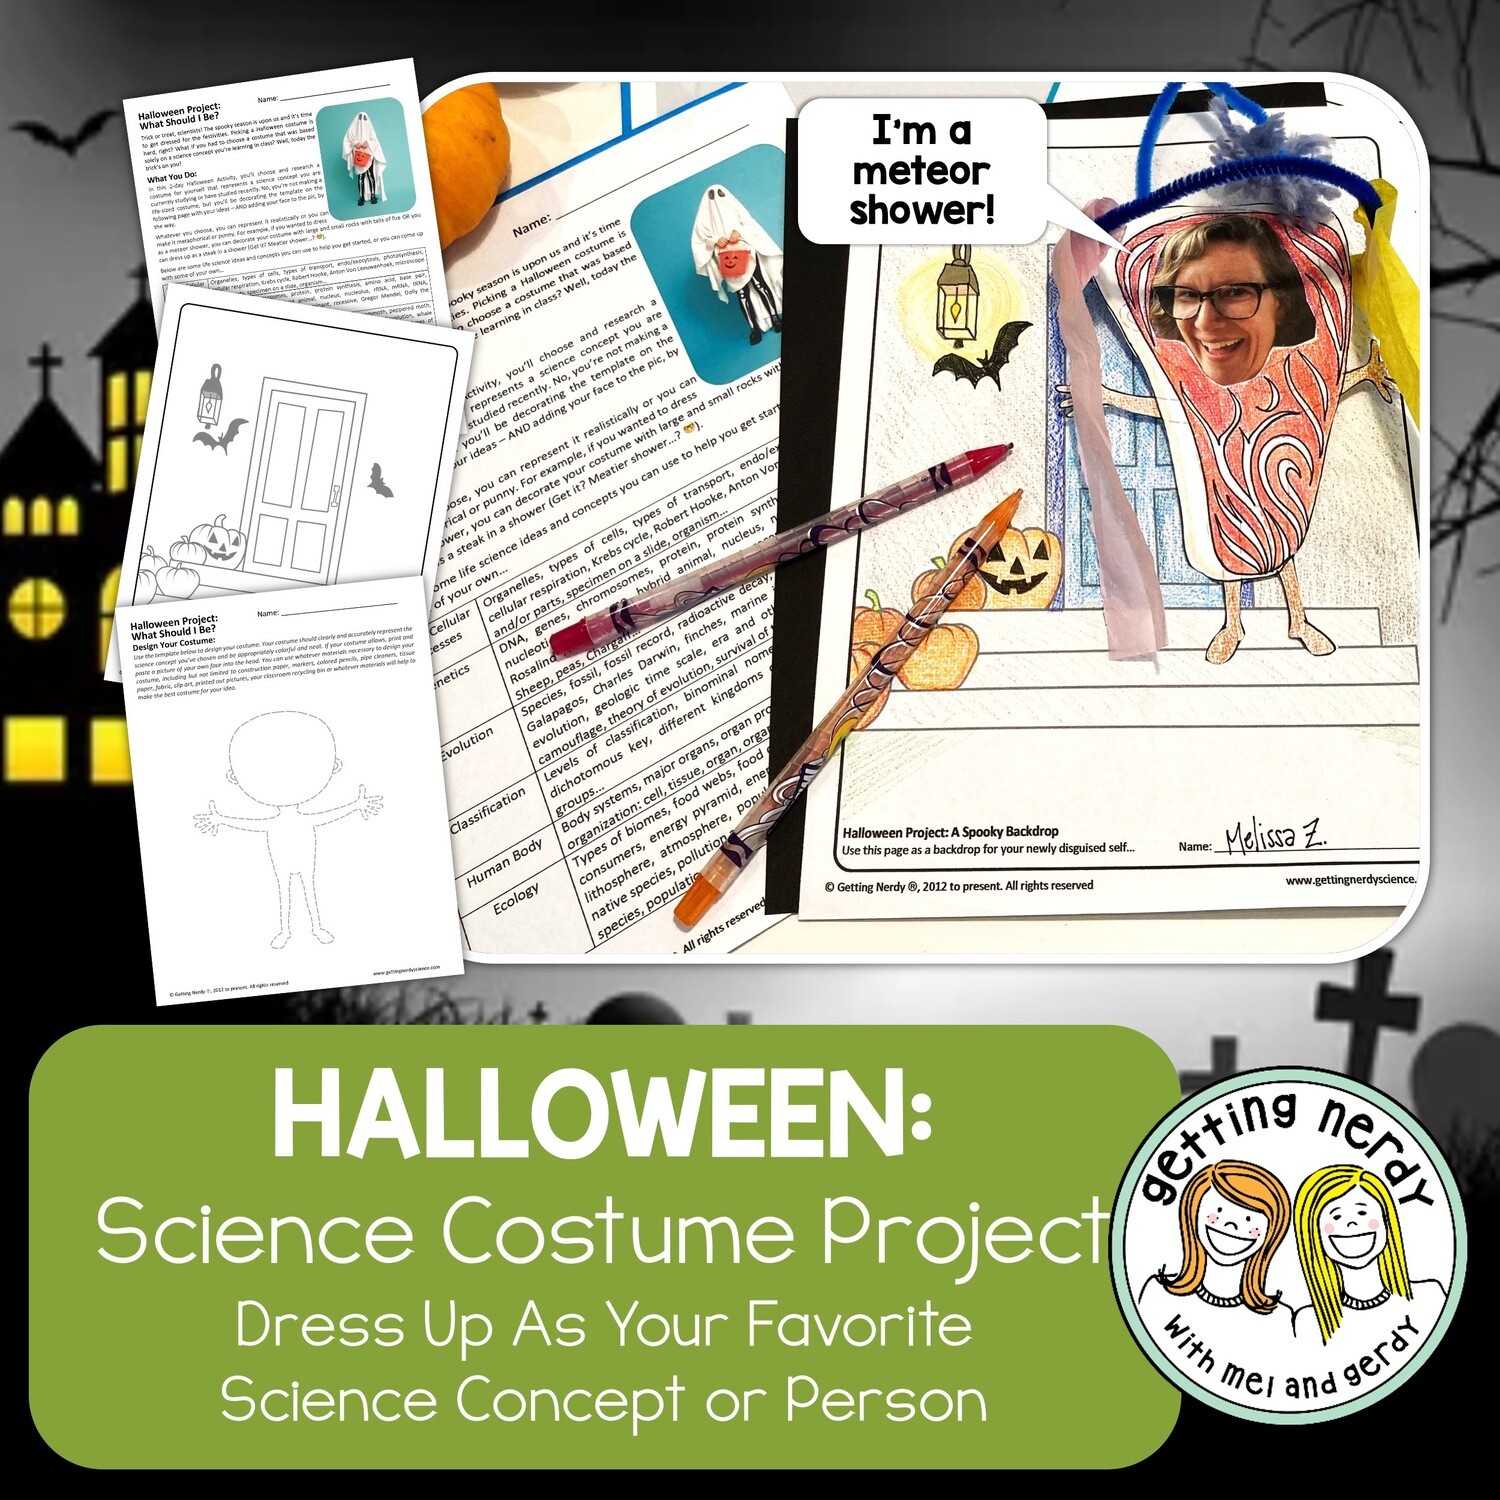 Halloween Science Costume Project